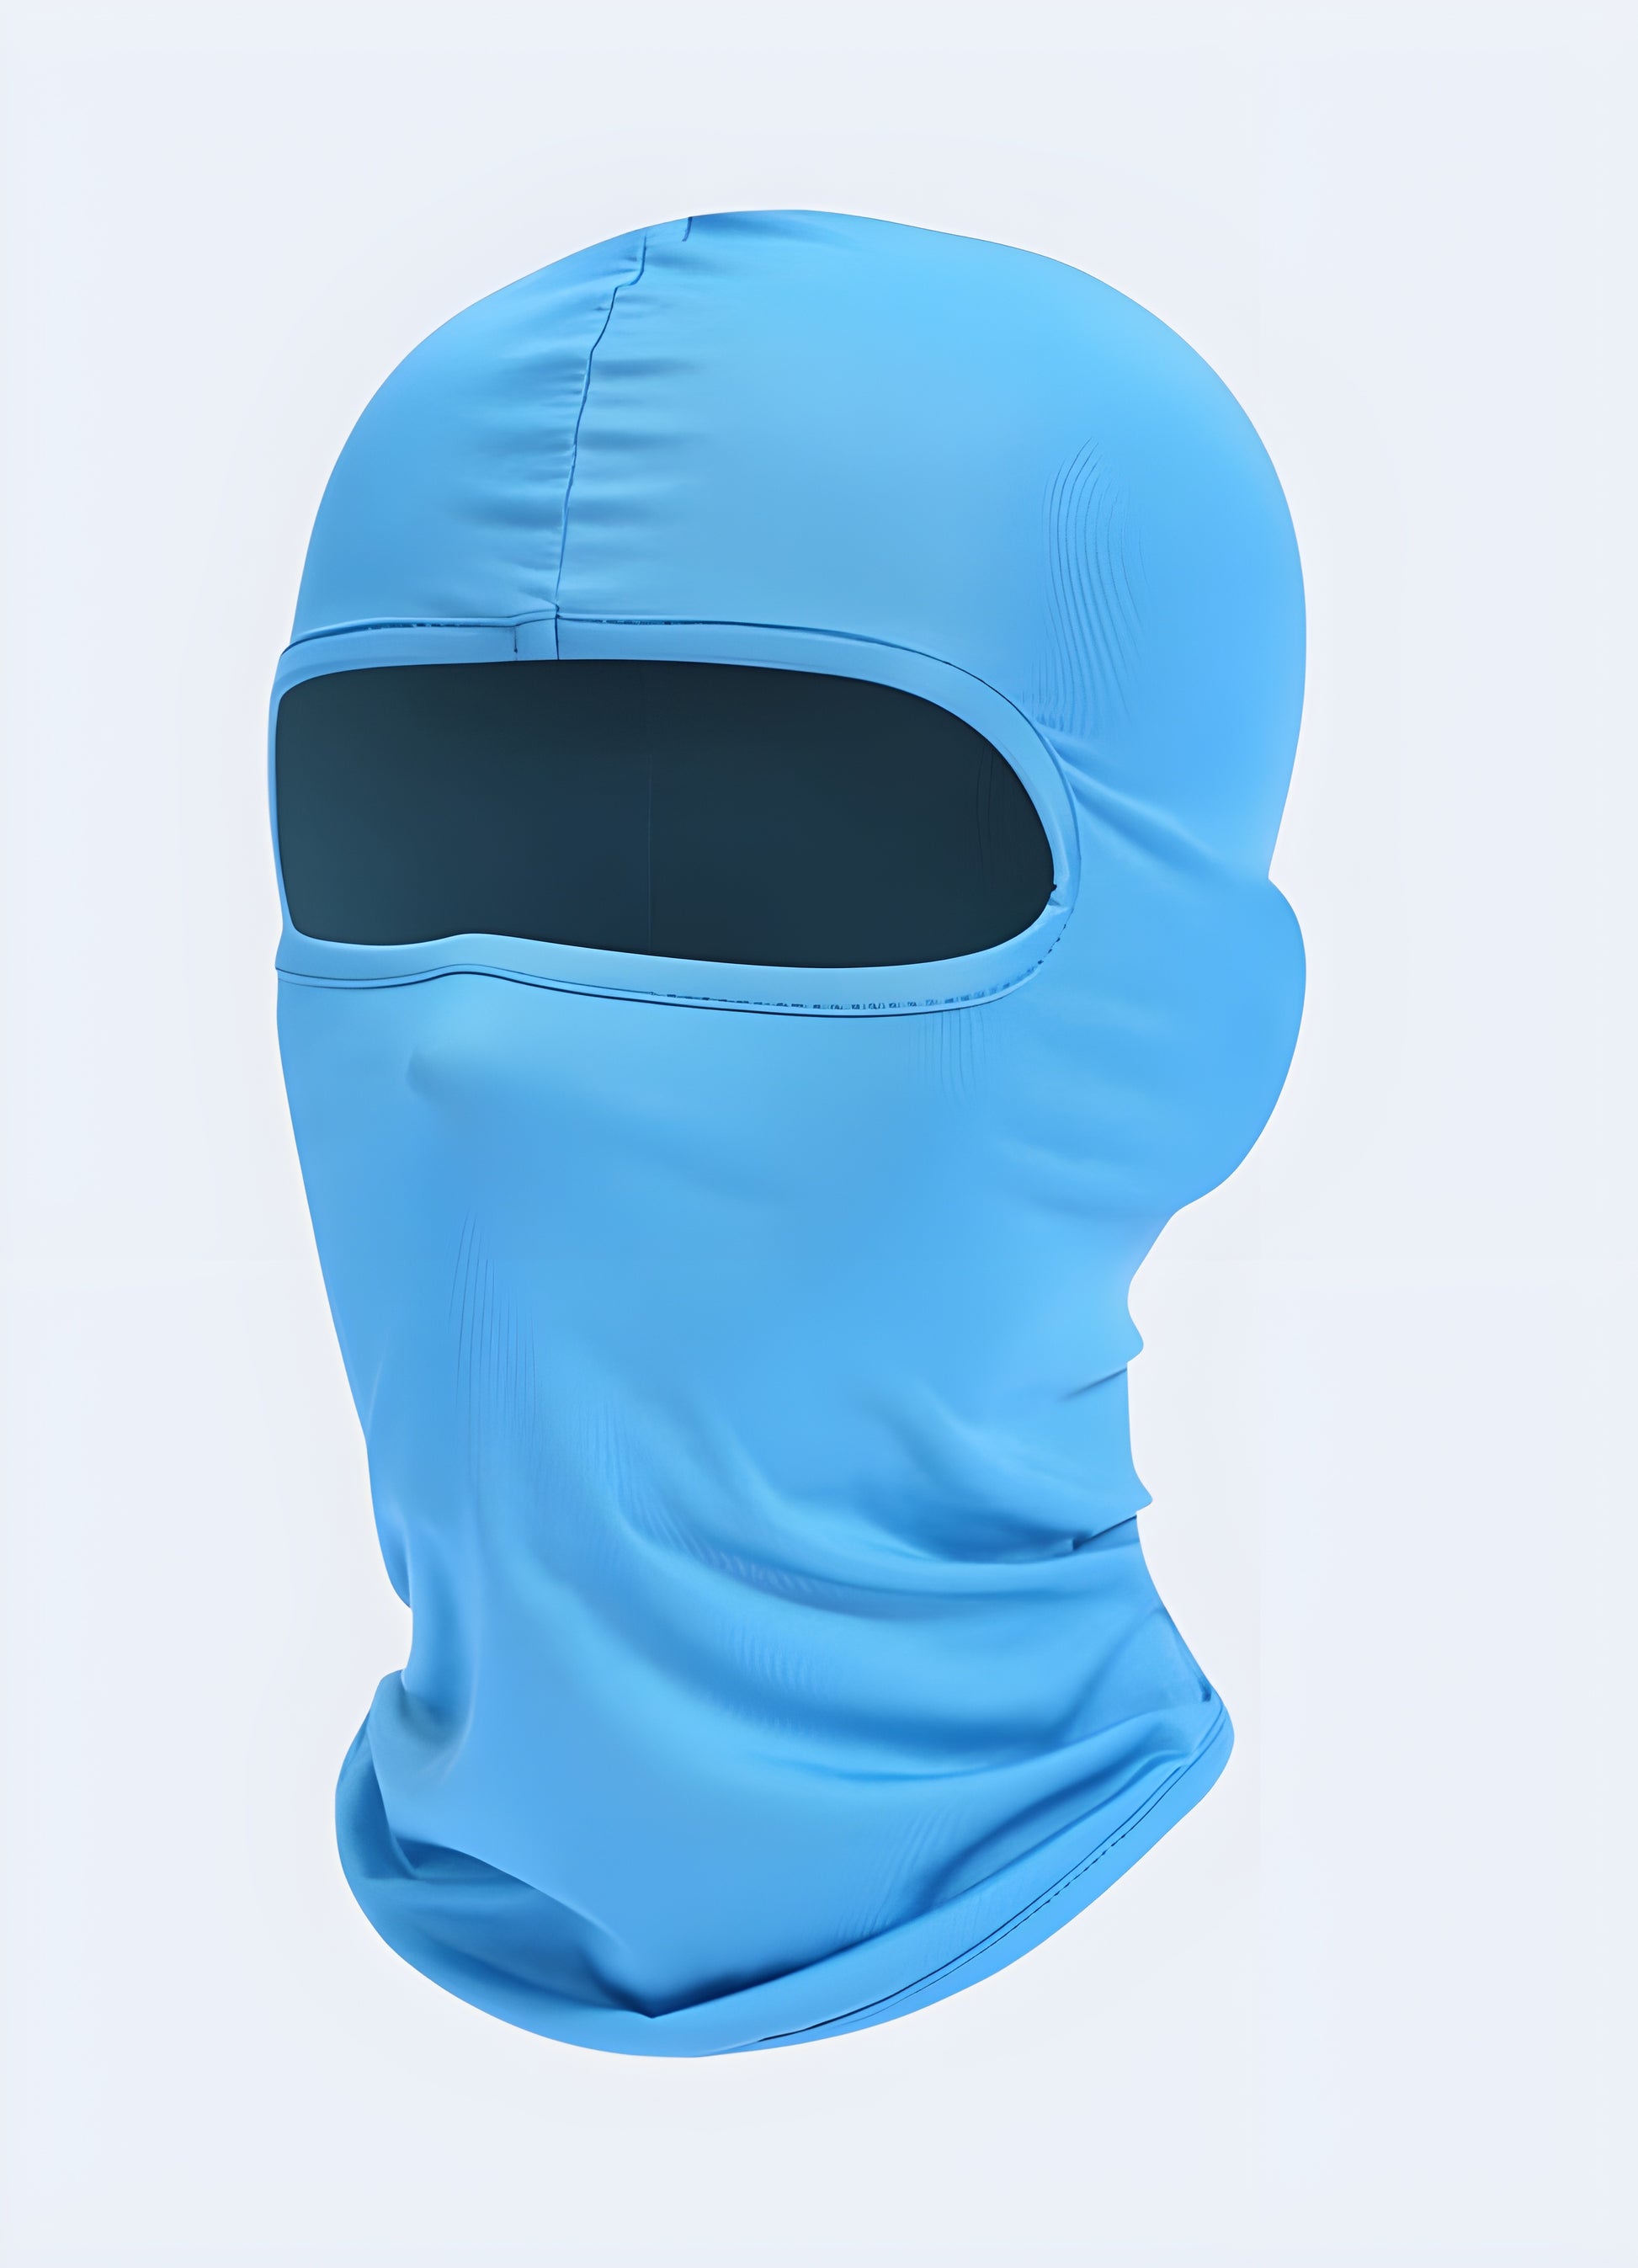  Layer under helmets, hoods, or wear it solo. This versatile balaclava adapts to your needs.